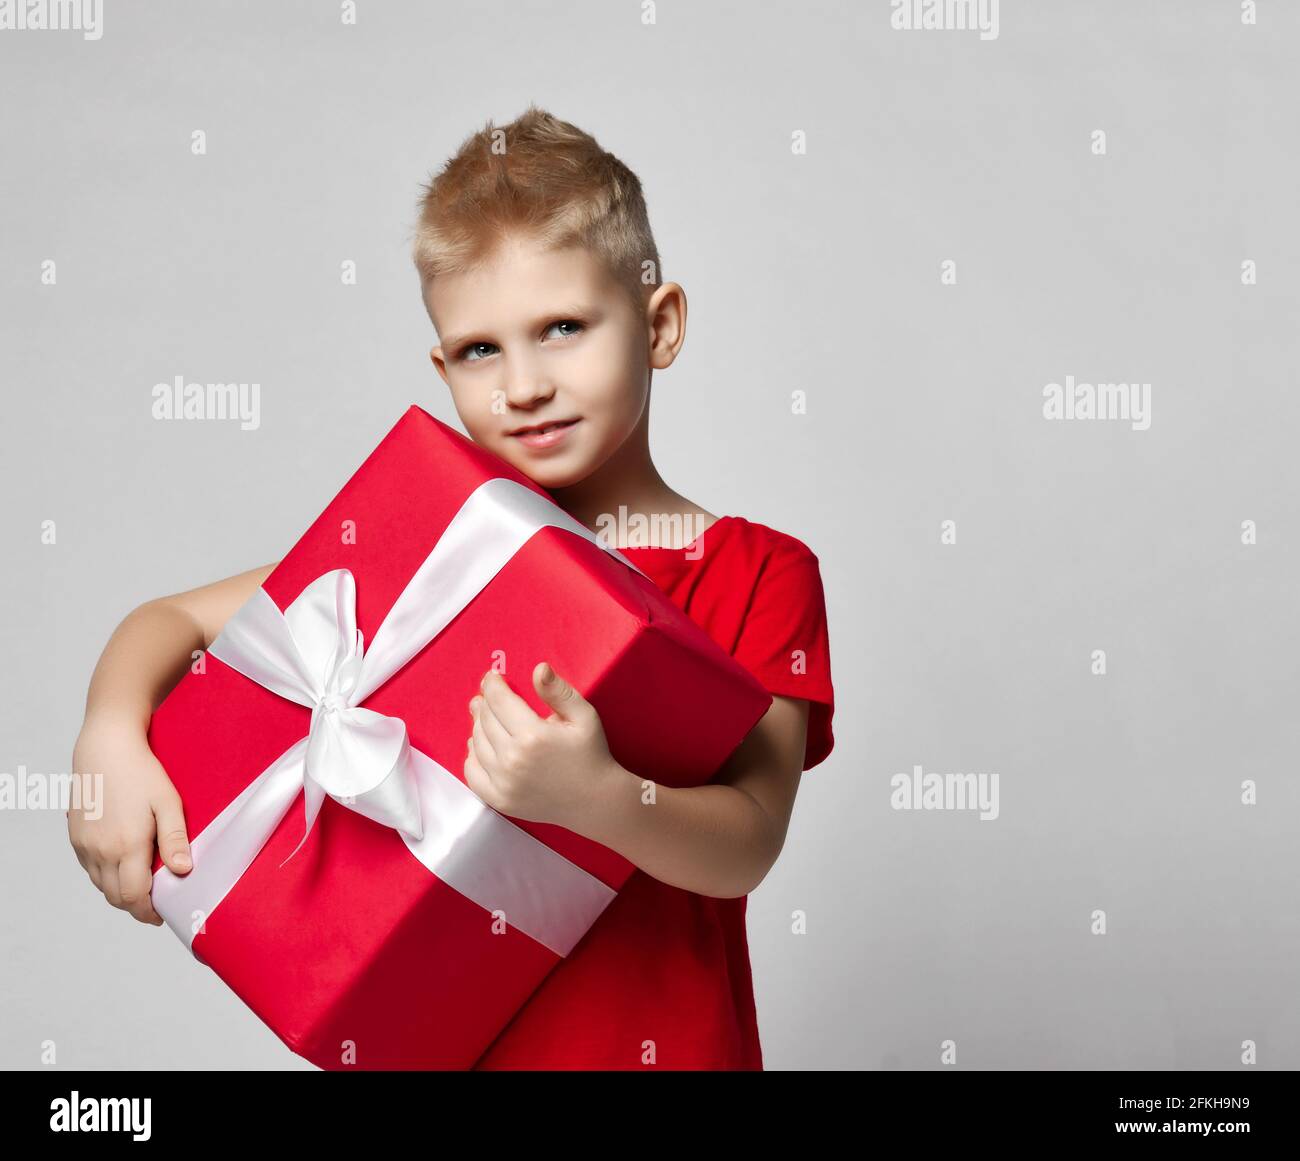 Portrait of cheerful kid boy in red t-shirt holding big present box with ribbon in hands, carrying it Stock Photo